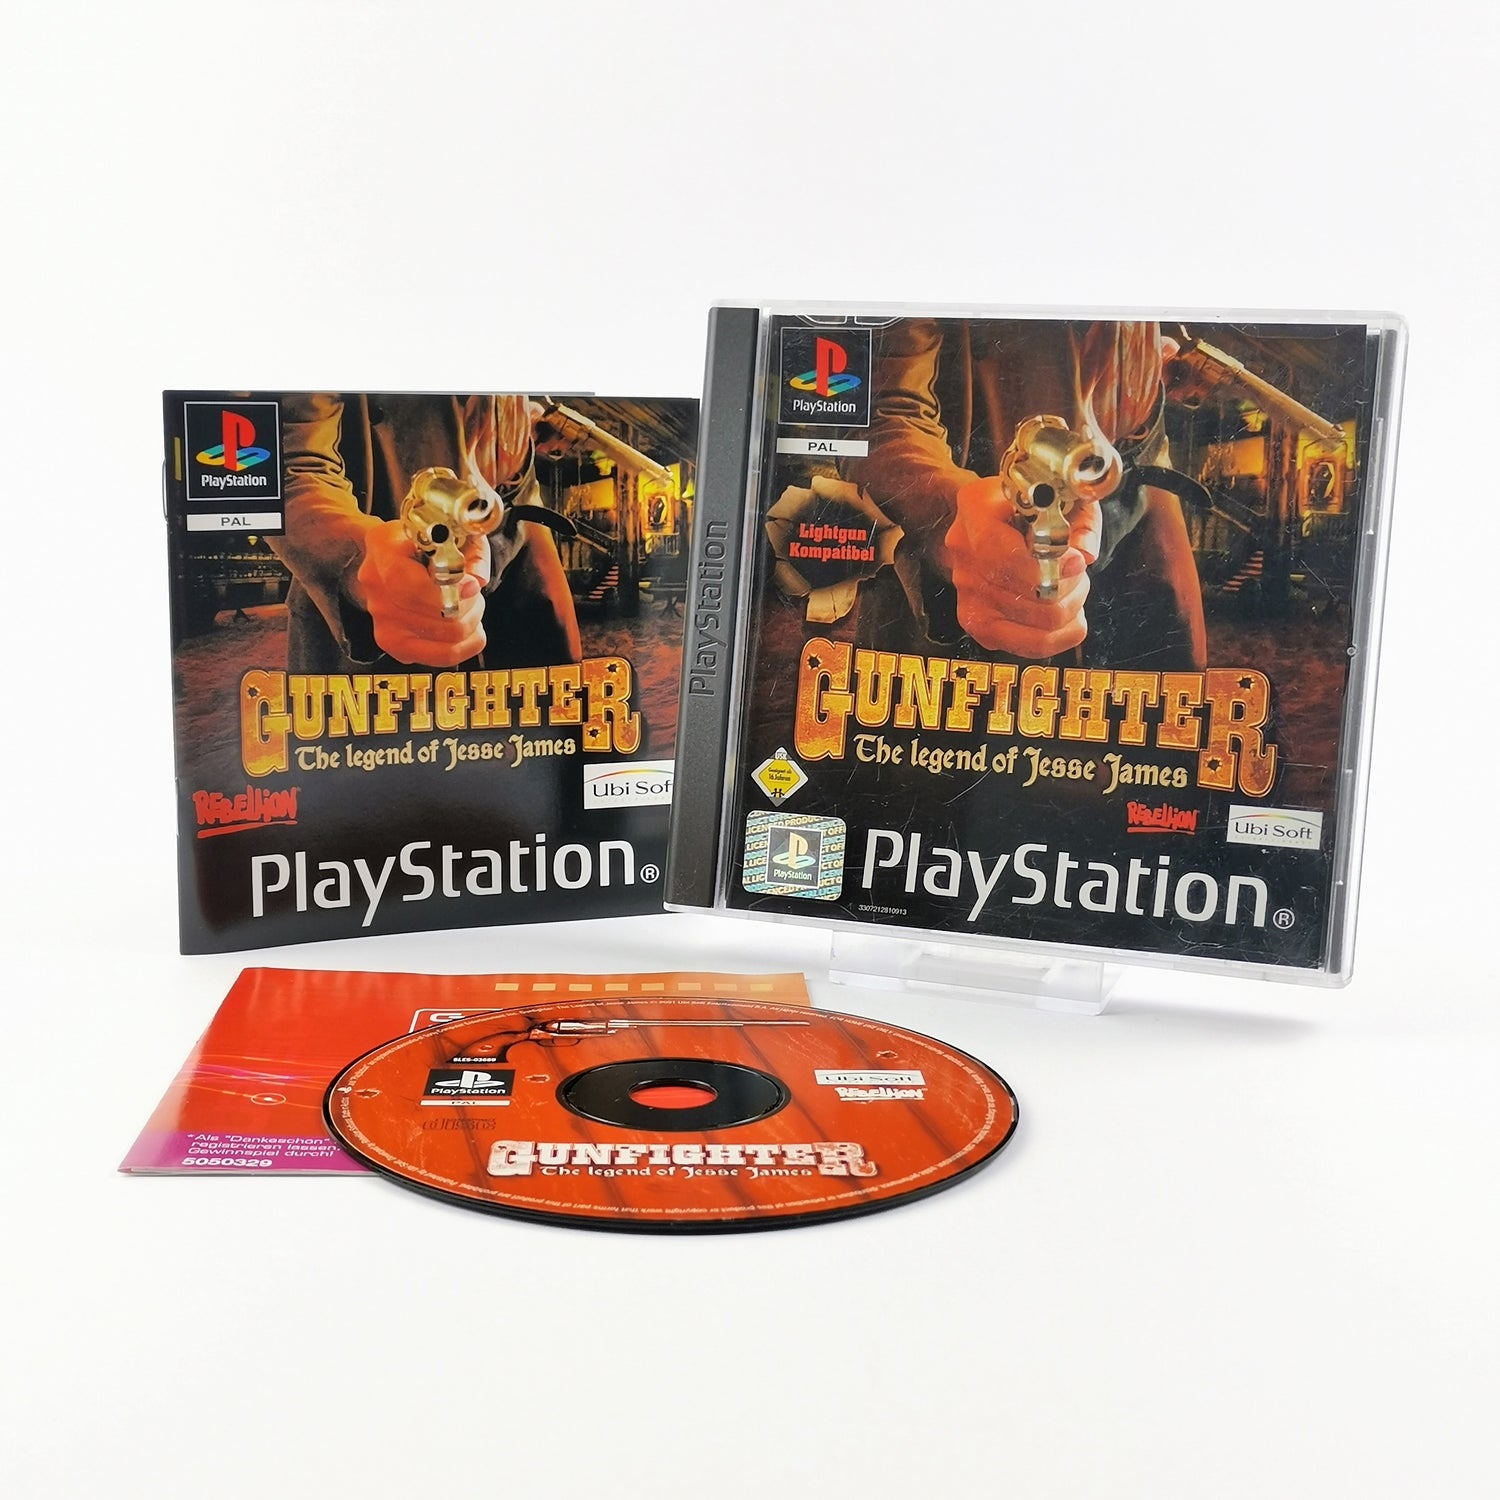 Sony Playstation 1 Game: Gunfighter The Legend of Jesse James - OVP PS1 PAL